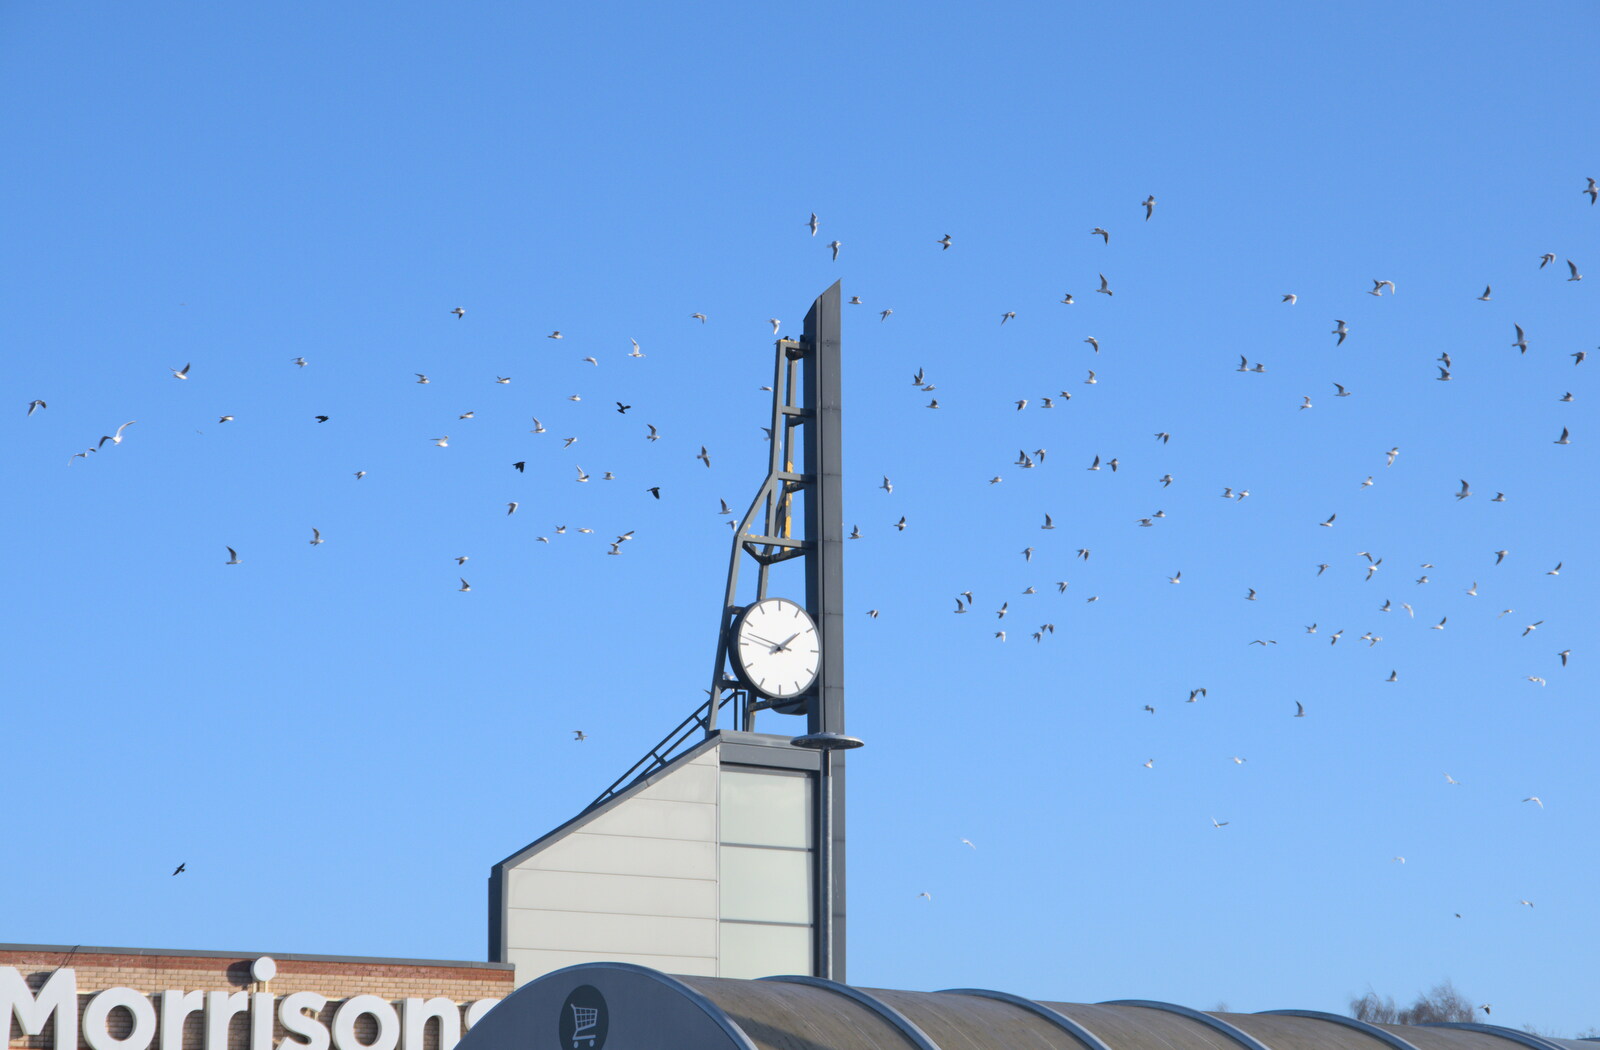 A load of birds whirl around Morrisons' clock from Joe Wicks and Diss on Saturday, Norfolk - 19th December 2020